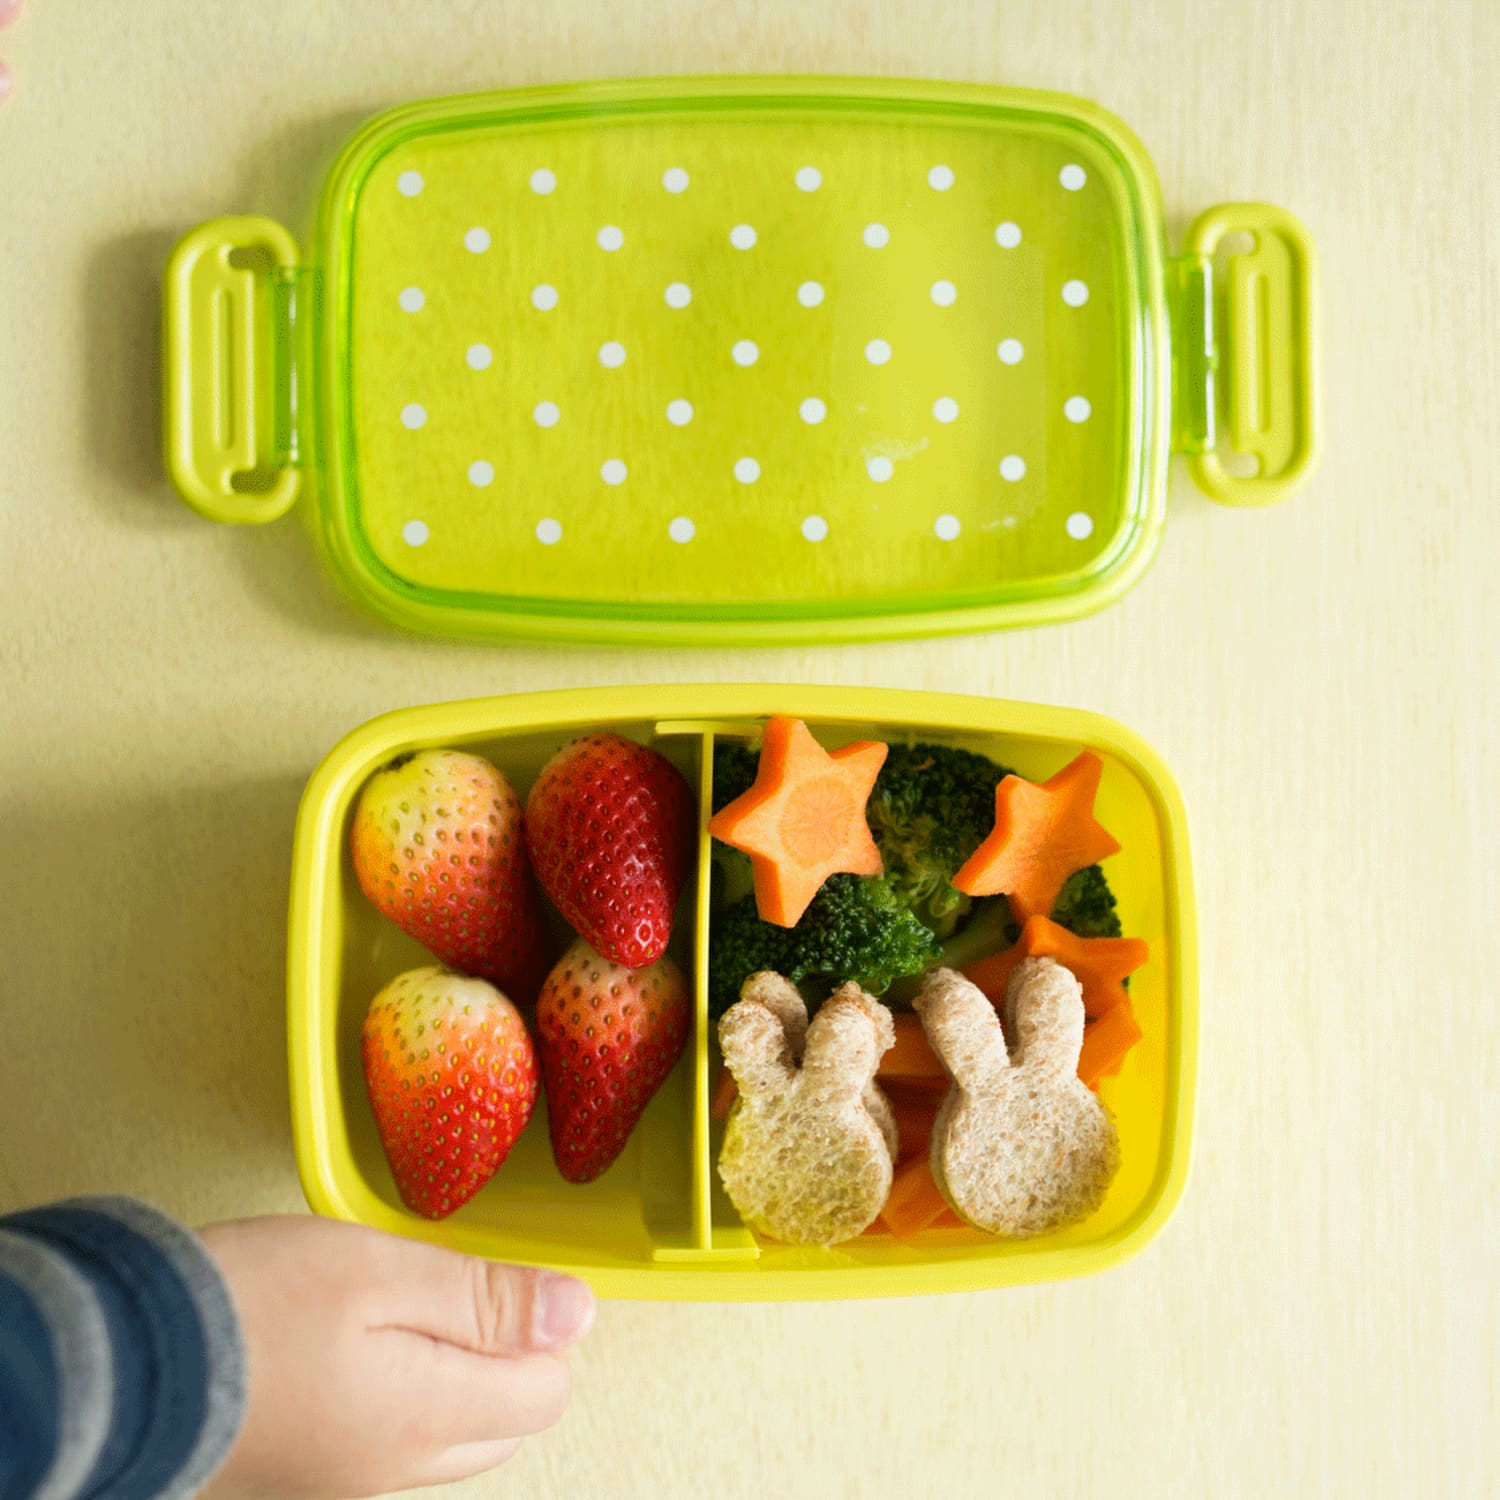 Silicone Cups - win lunch time & turn any lunch box in to a bento